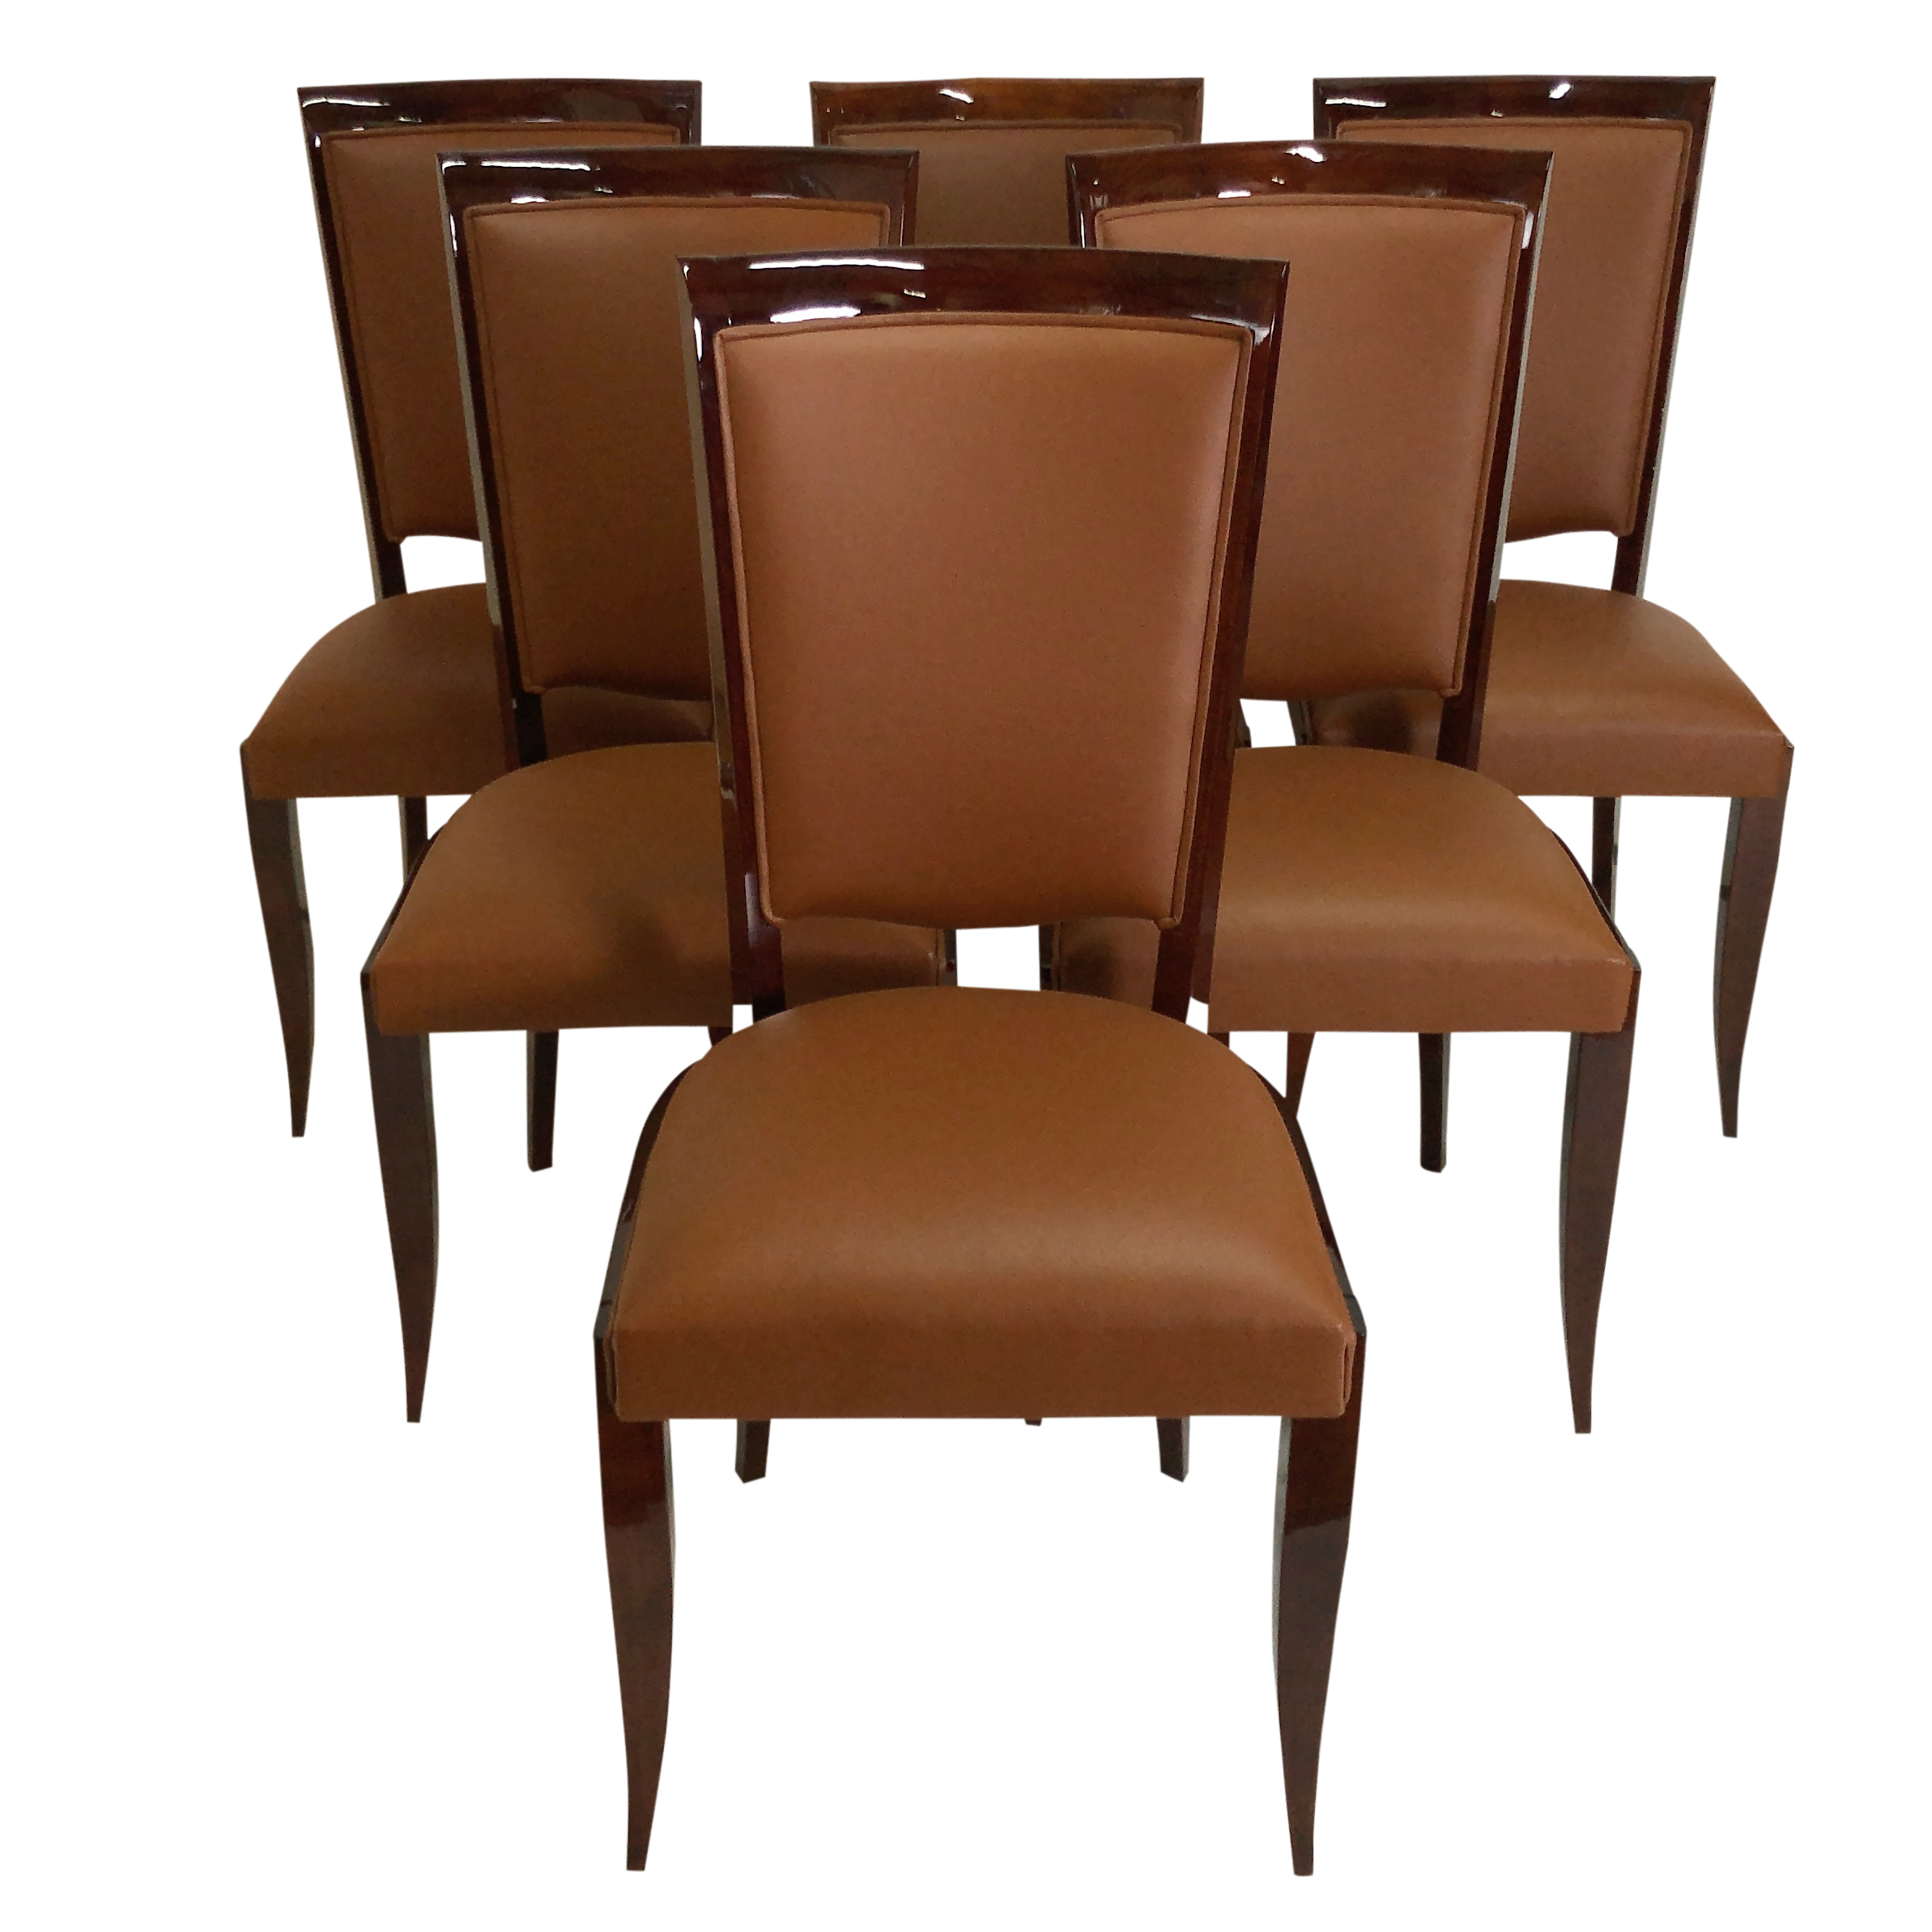 Set of 6 identical art deco chairs